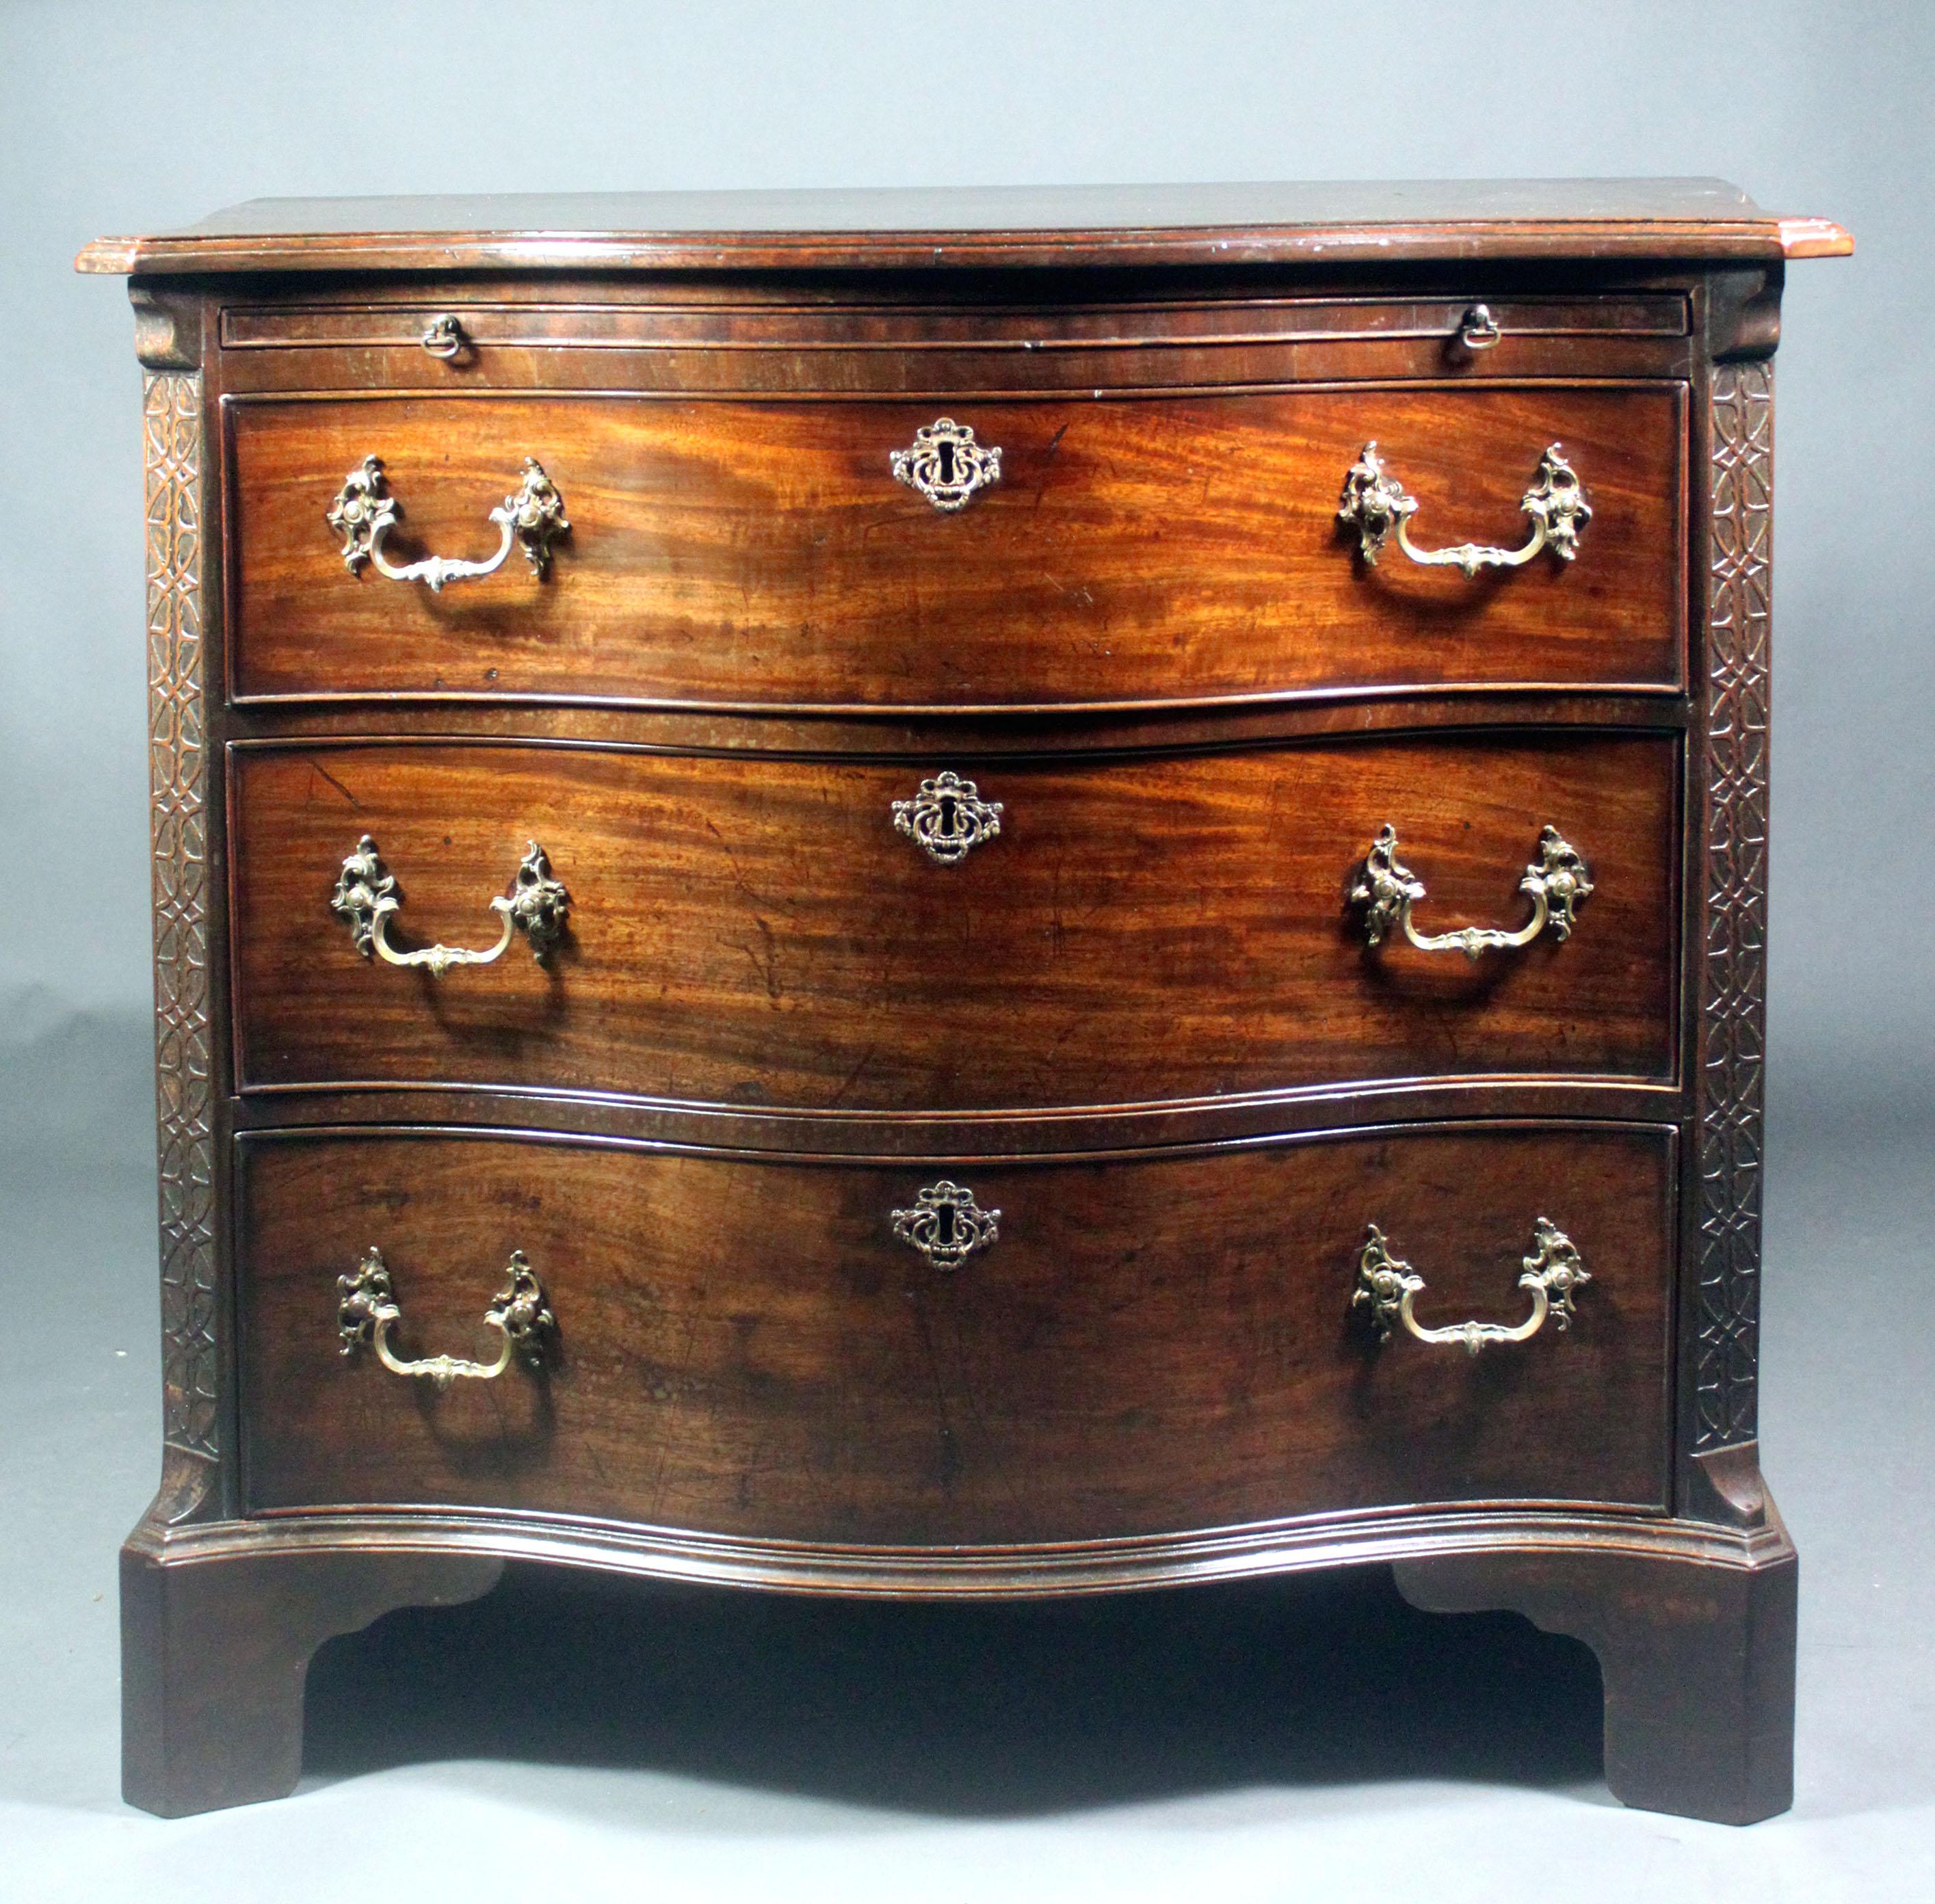 A fine George III Chippendale period serpentine chest in figured mahogany of an original colour and patina. Good features include the brushing slide, canted corners with blind fret and the original carrying handles. The old rococo swan neck handles